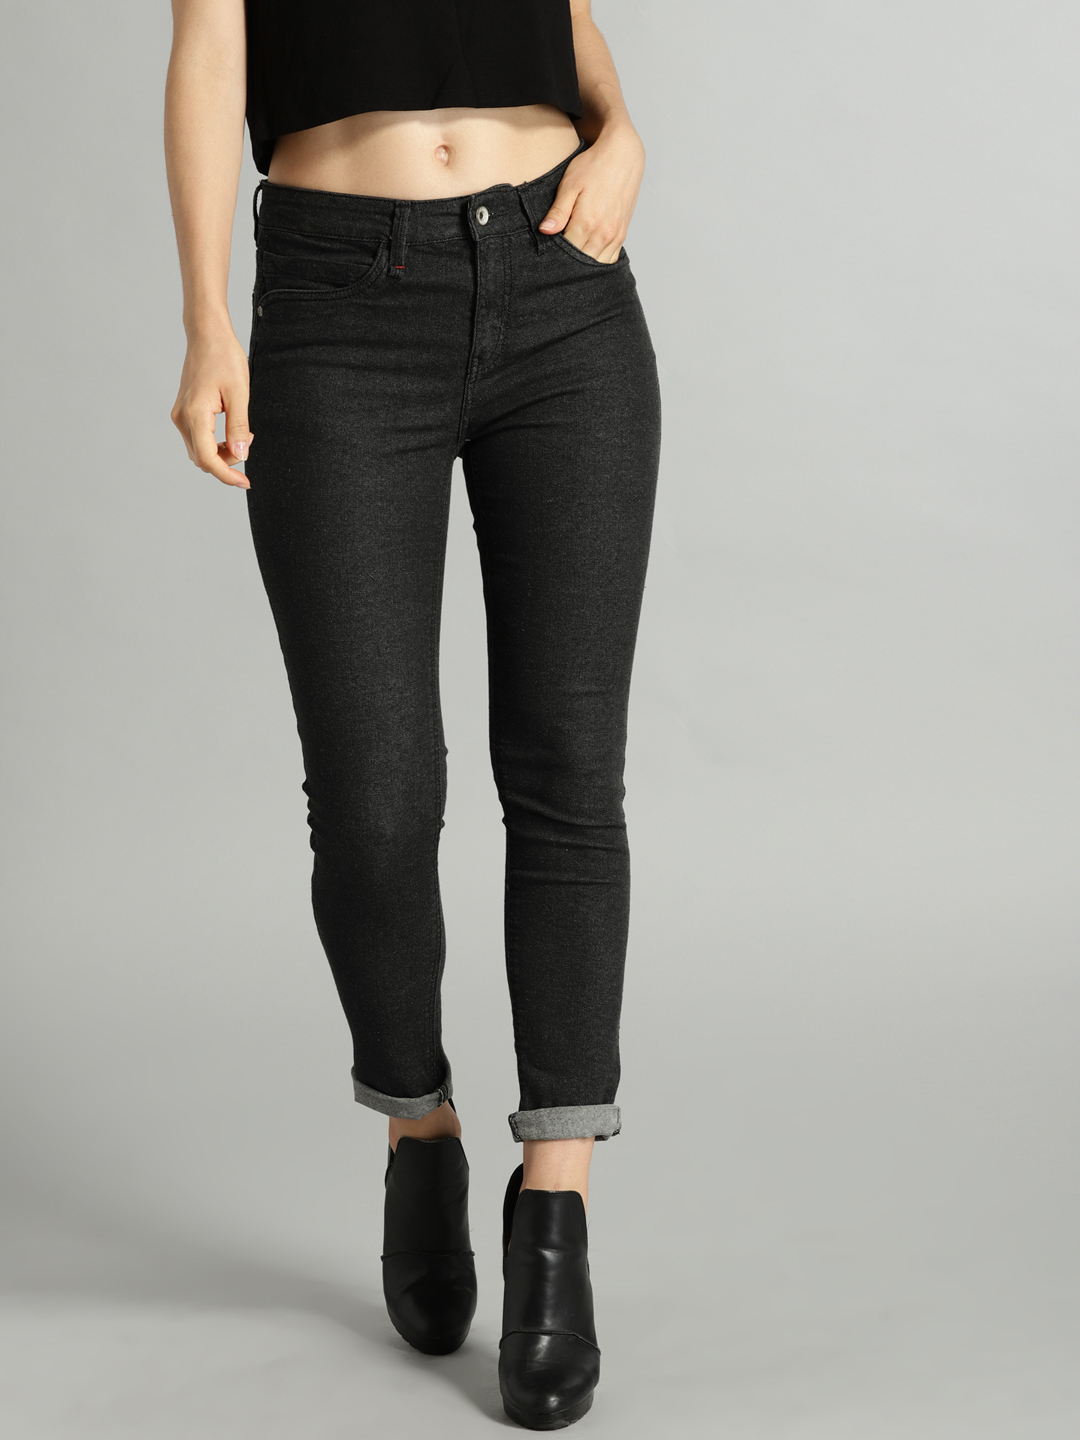 Roadster Women Black Slim Fit Mid-Rise Clean Look Stretchable Jeans Price in India